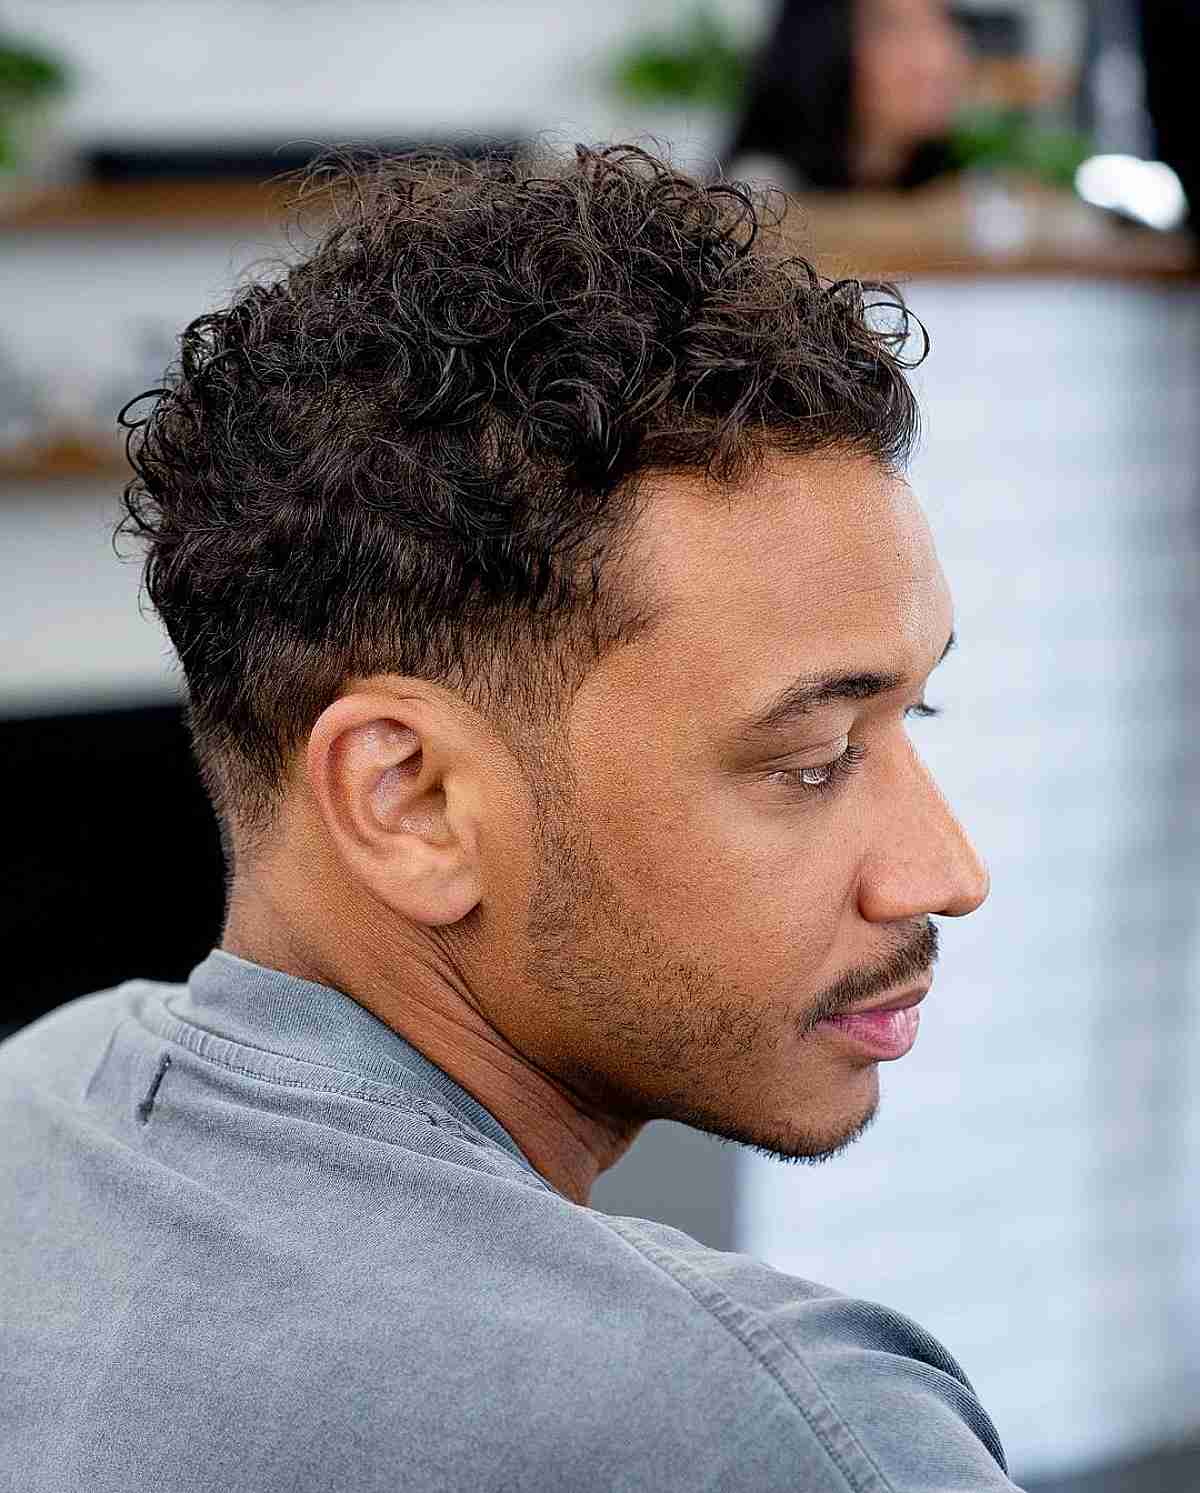 Aggregate more than 92 mens medium length curly hairstyles - in.eteachers